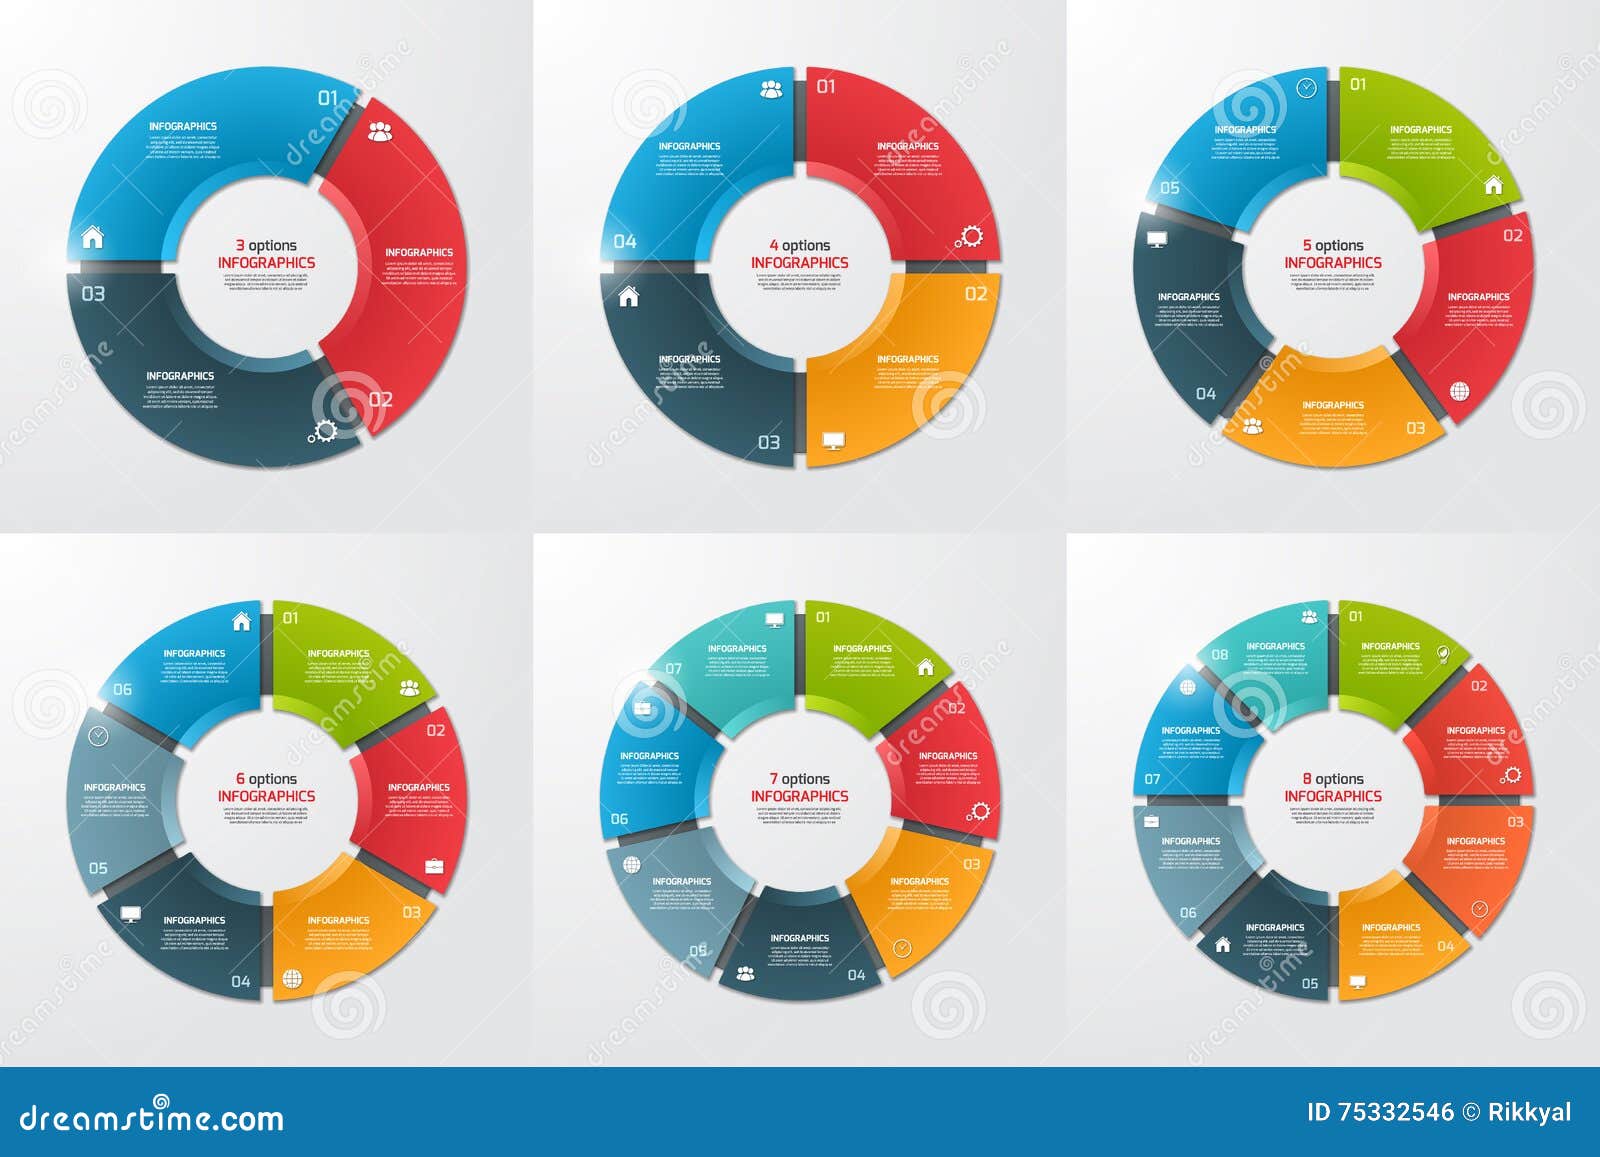 set of pie chart circle infographic templates with 3-8 options.